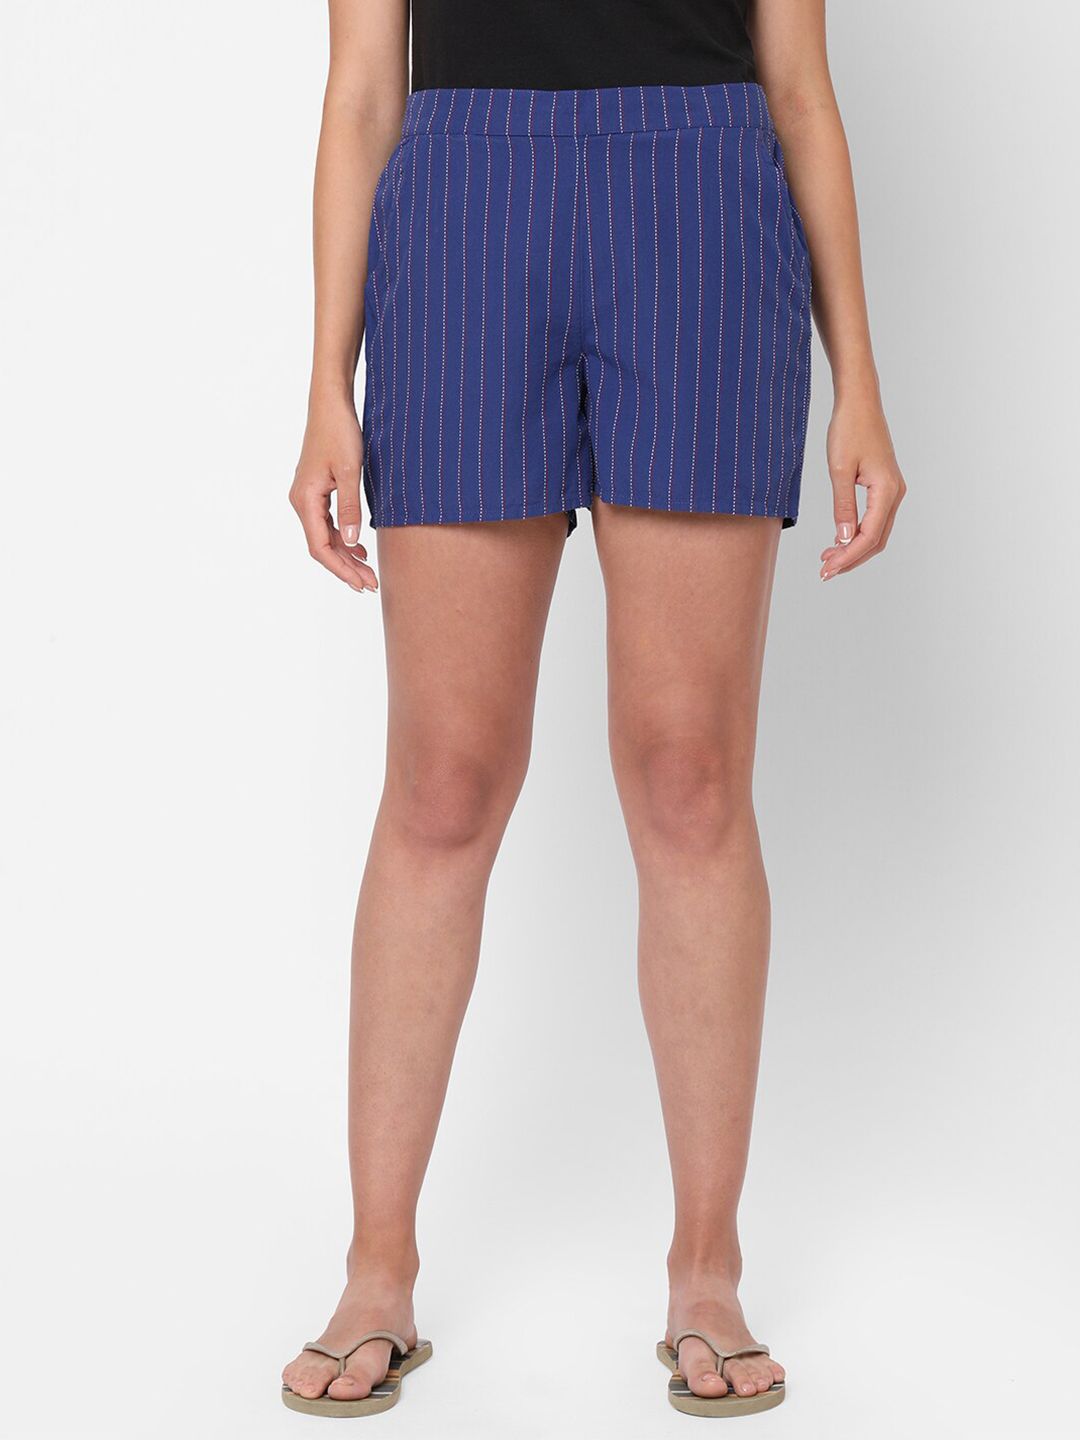 Mystere Paris Women Navy Blue Striped Lounge Shorts Price in India